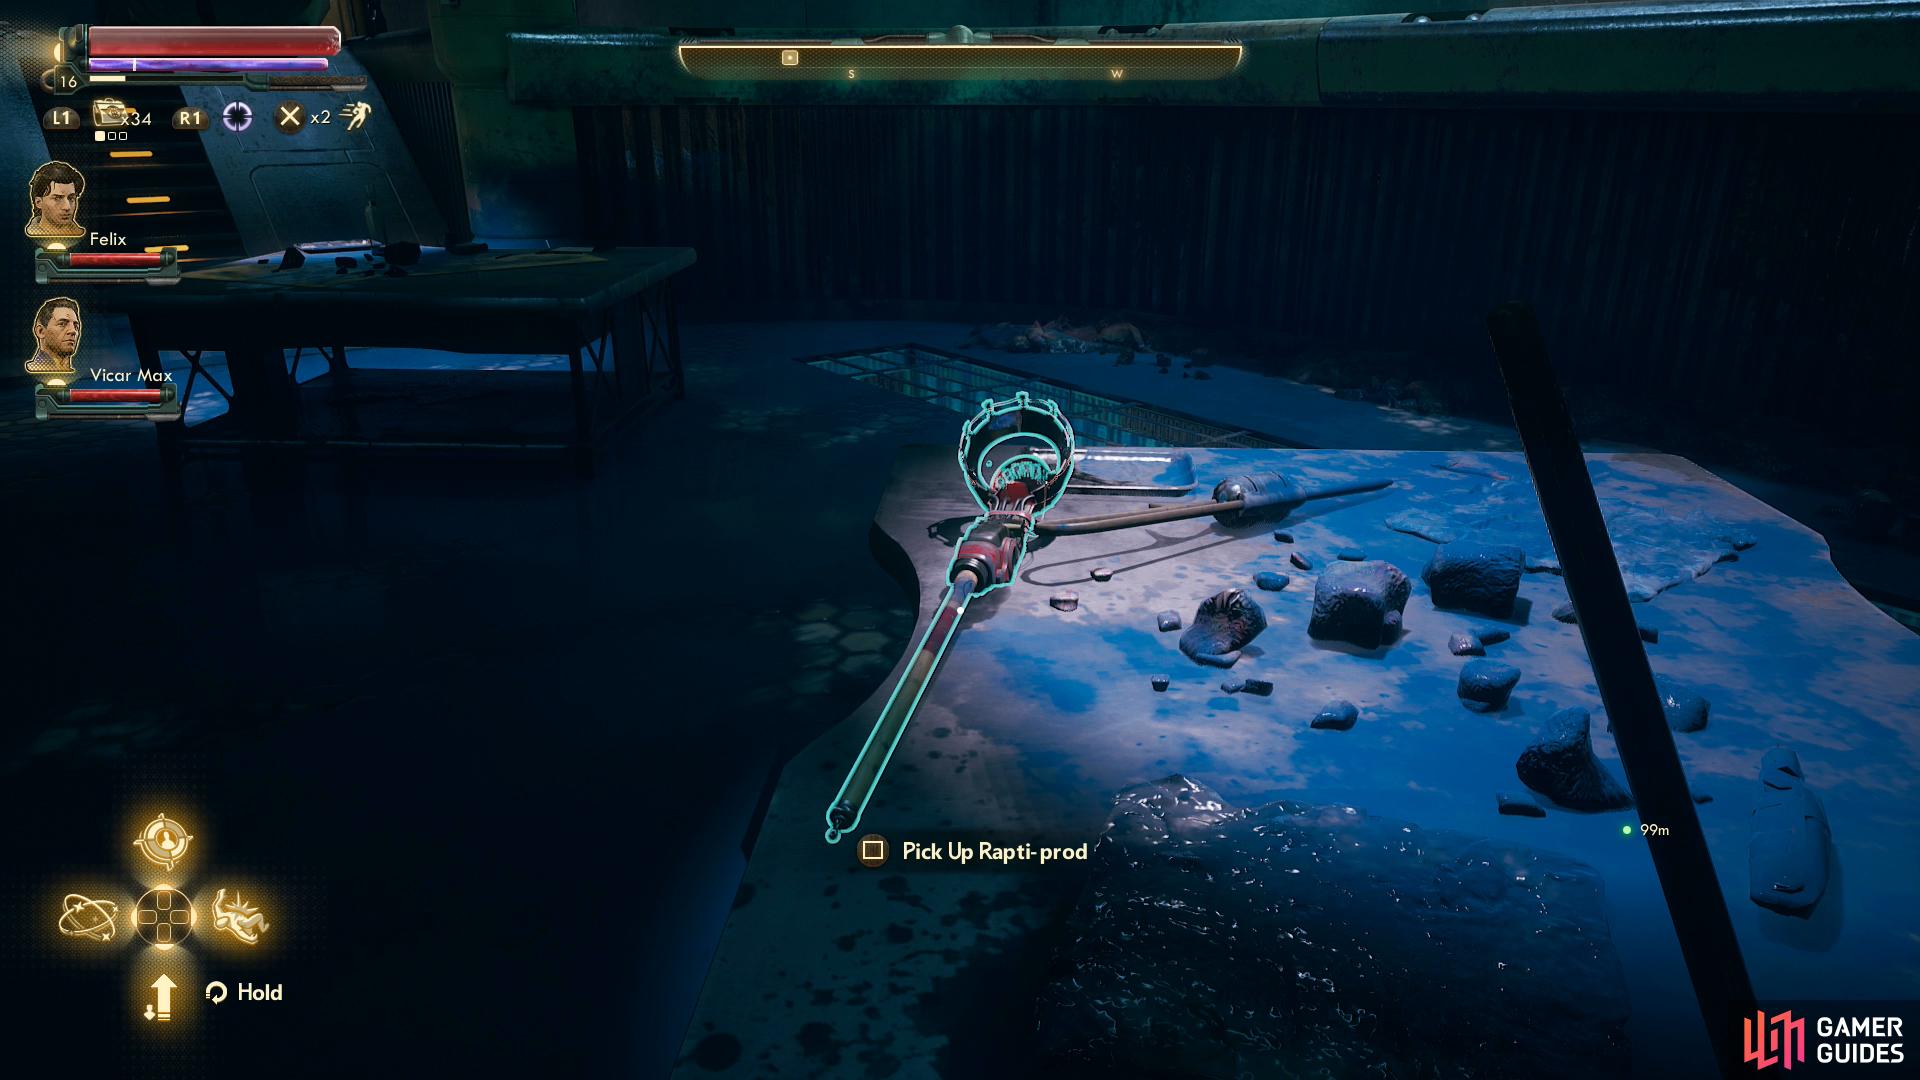 The Outer Worlds Walkthrough, Guide, Gameplay and More - News